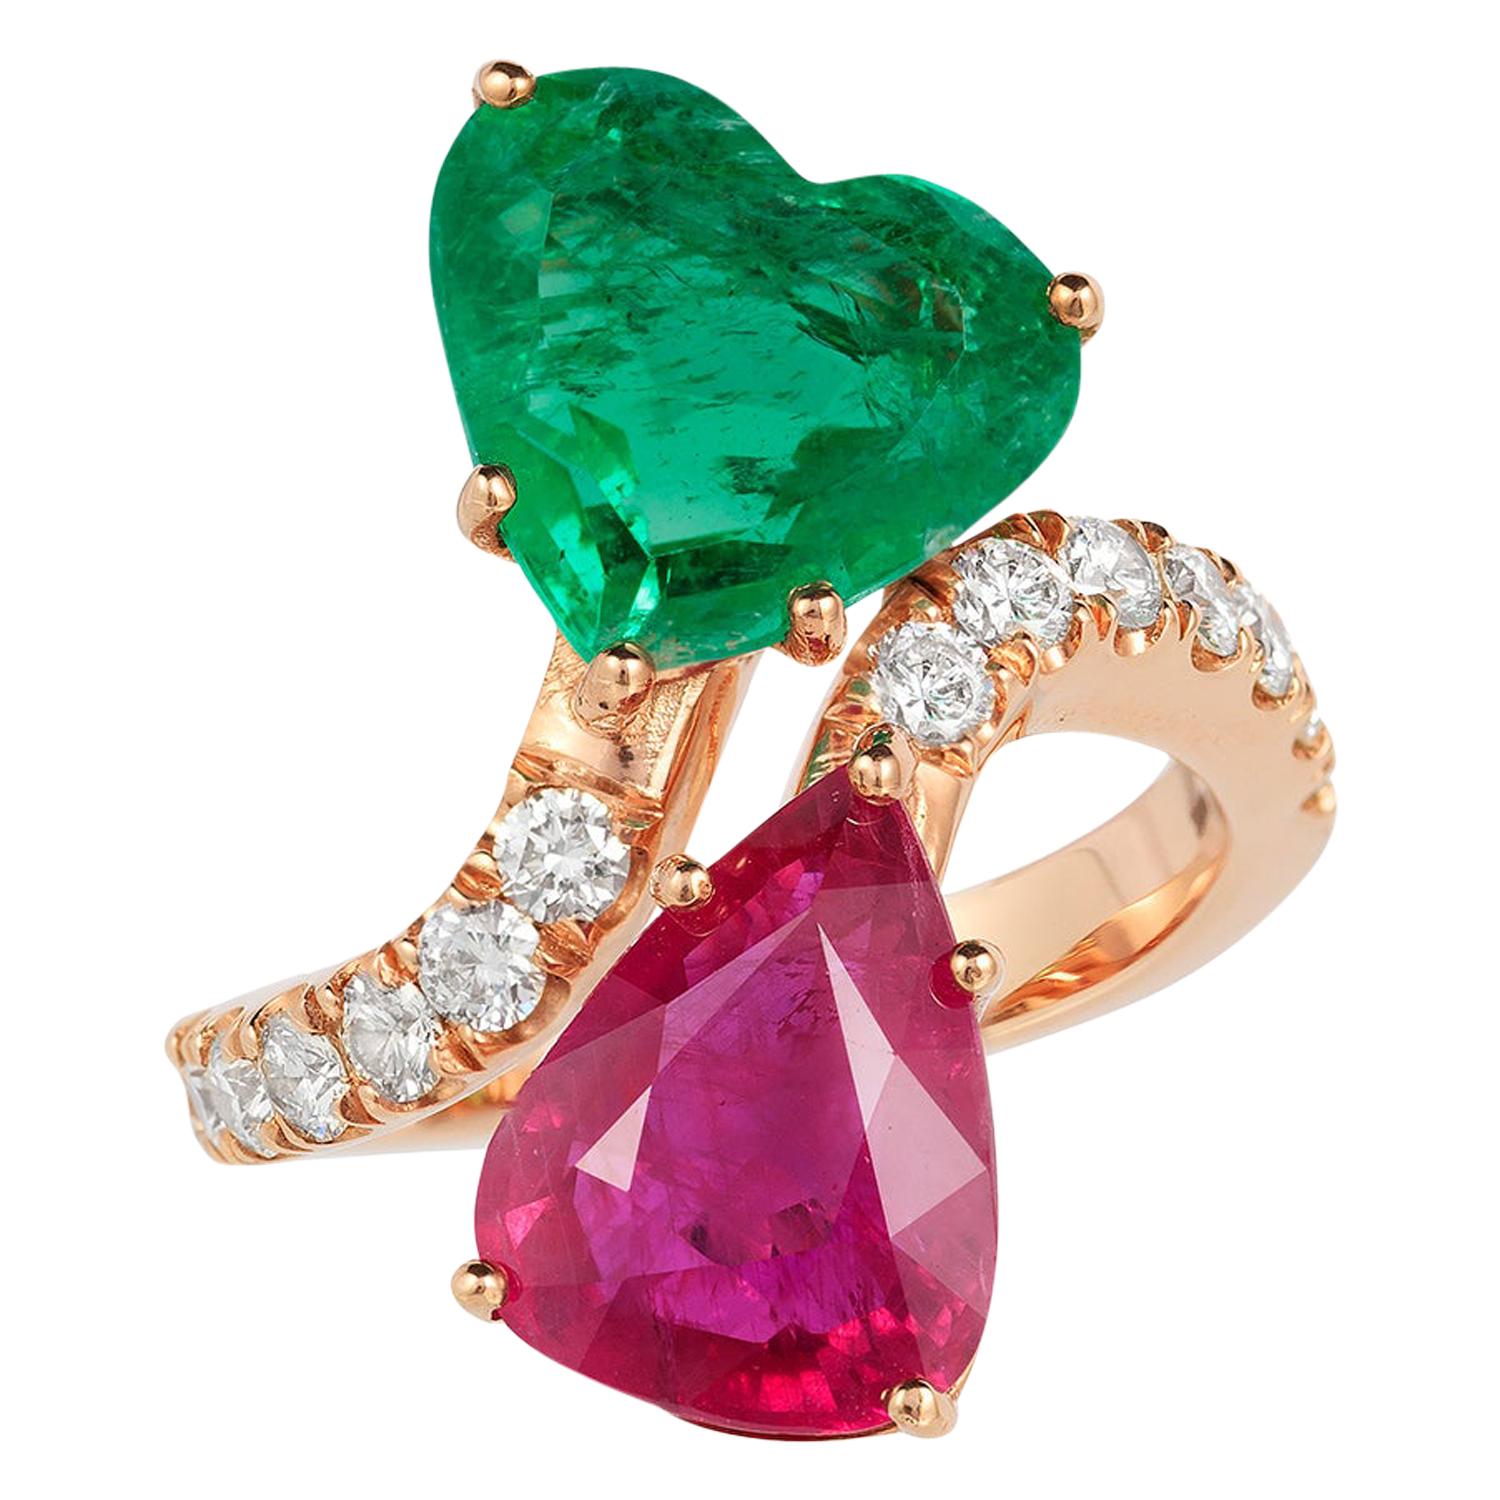 Andreoli Certified 3.84 Carat Colombian Hear tShape Emerald 4.76 Carat Ruby Ring For Sale